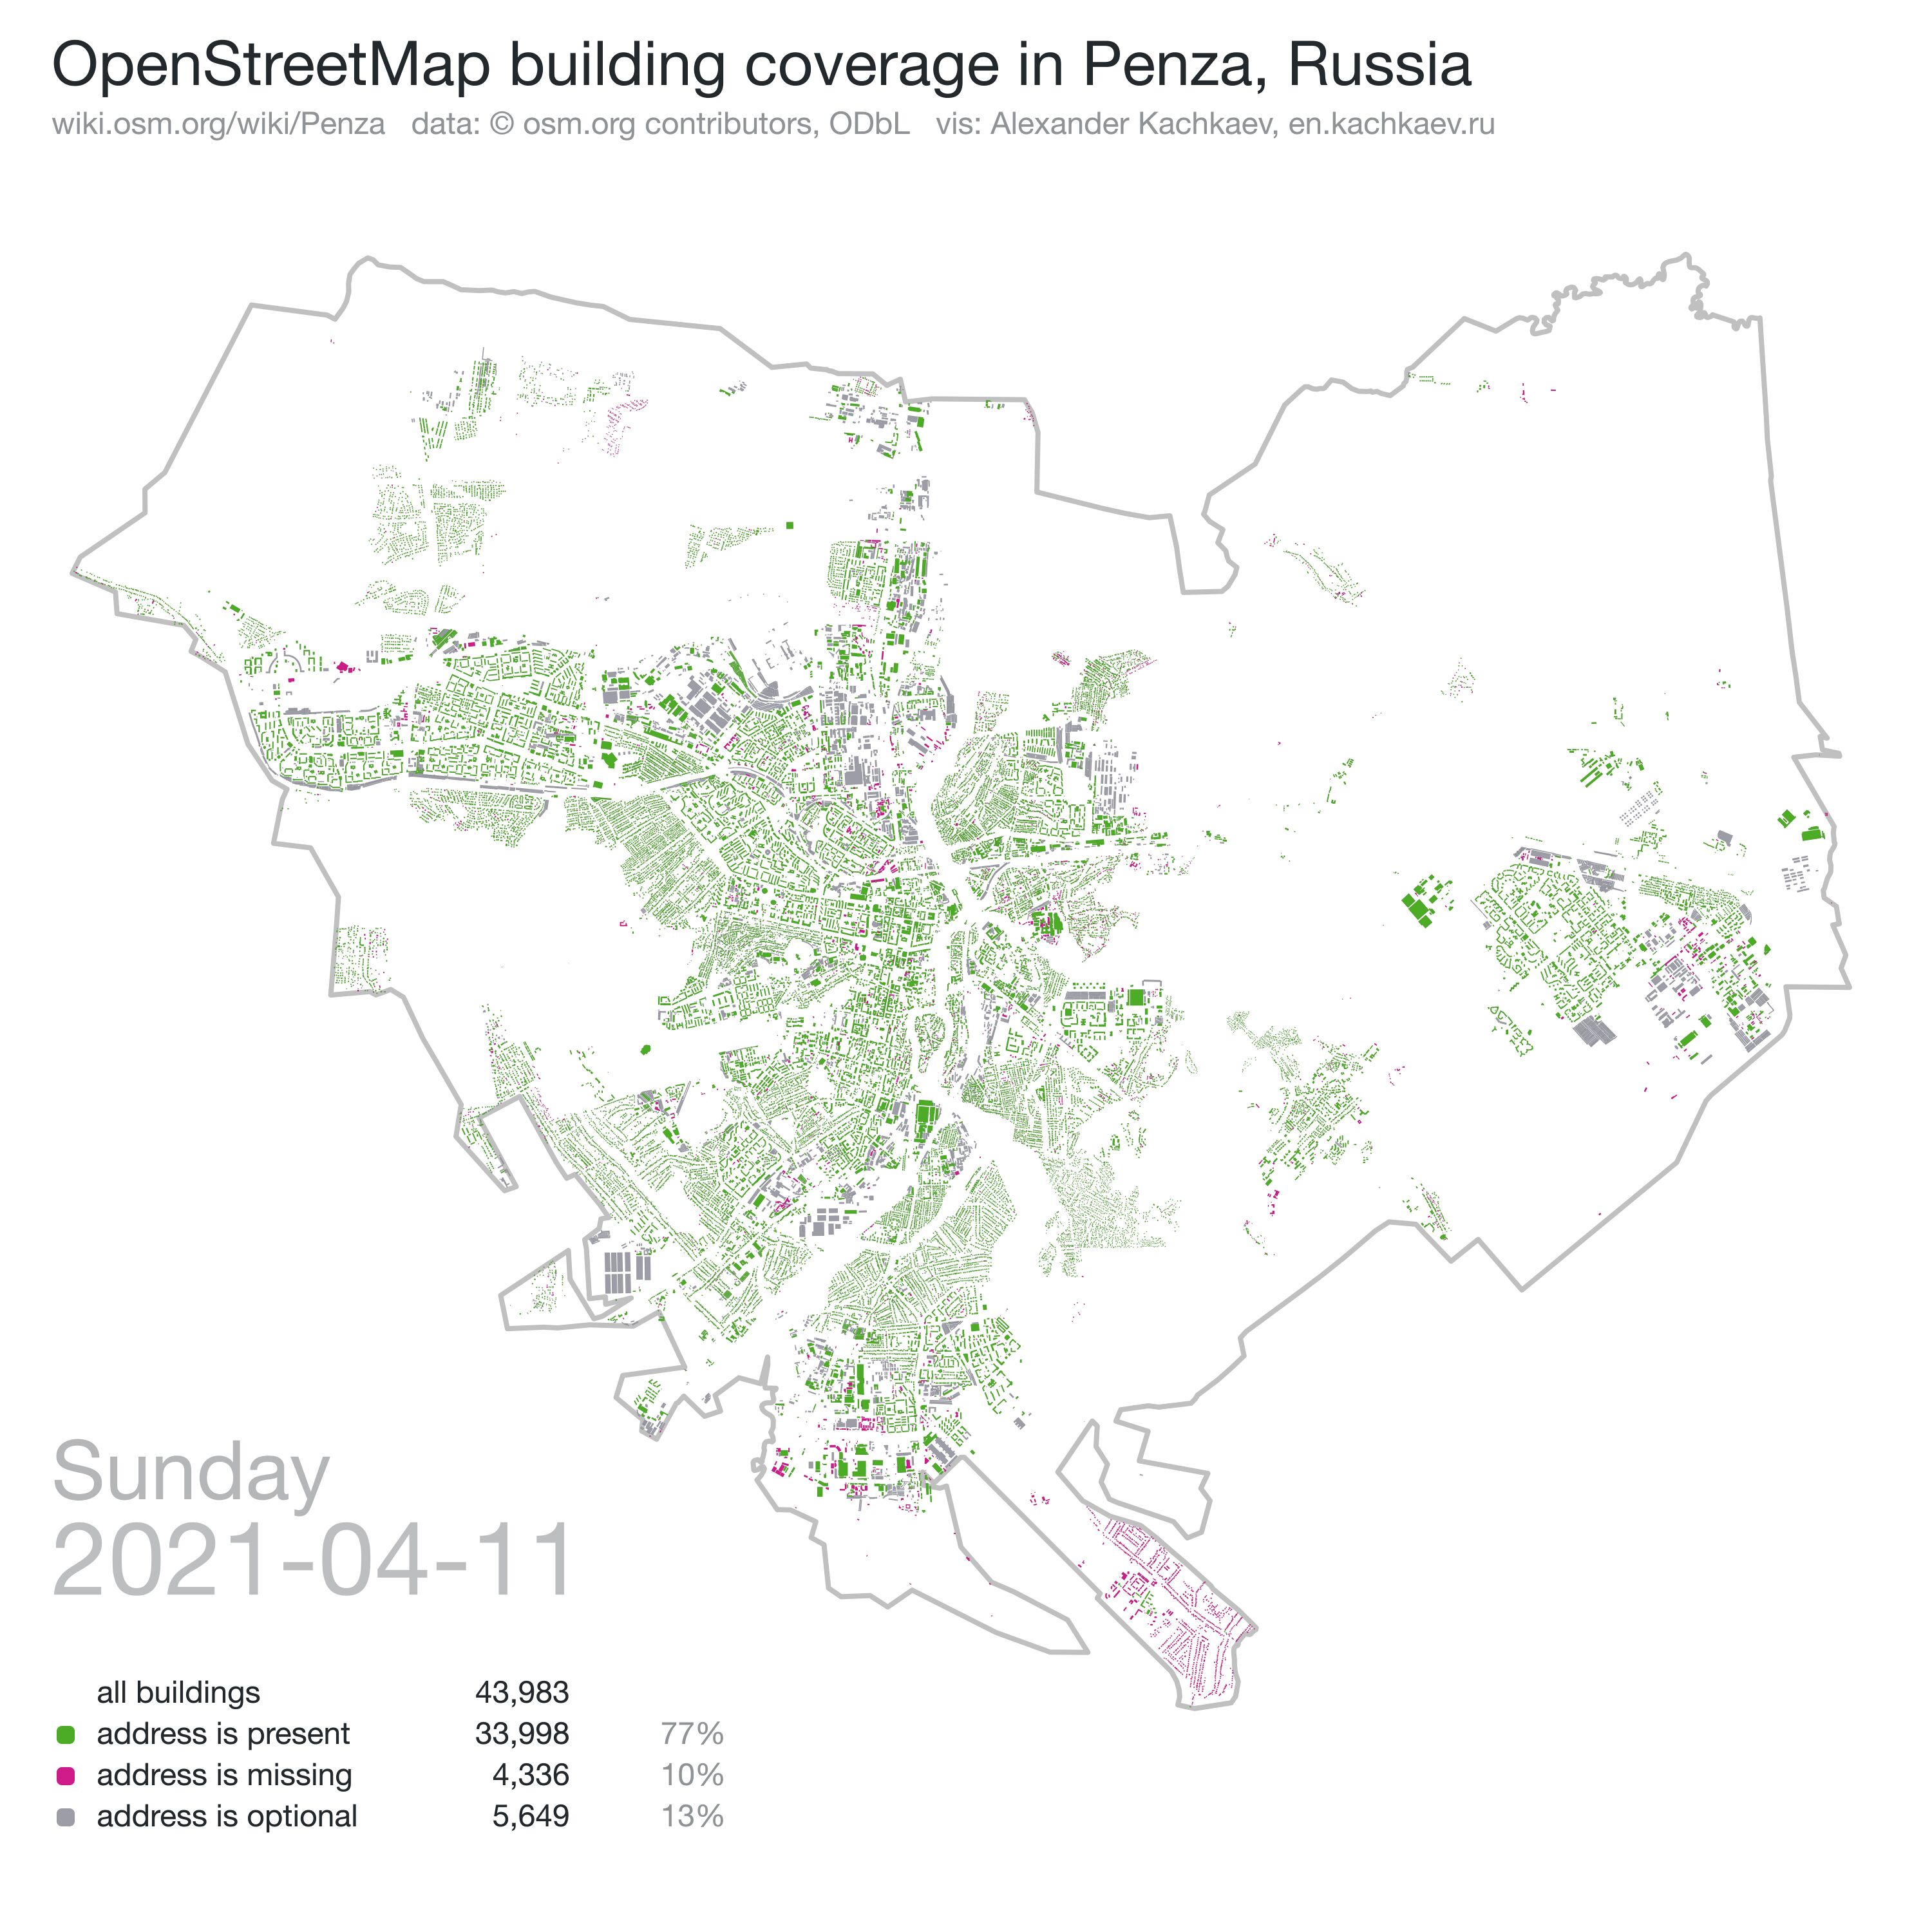 geo map with buildings in Penza coloured by their address status (most of the building outlines are green)